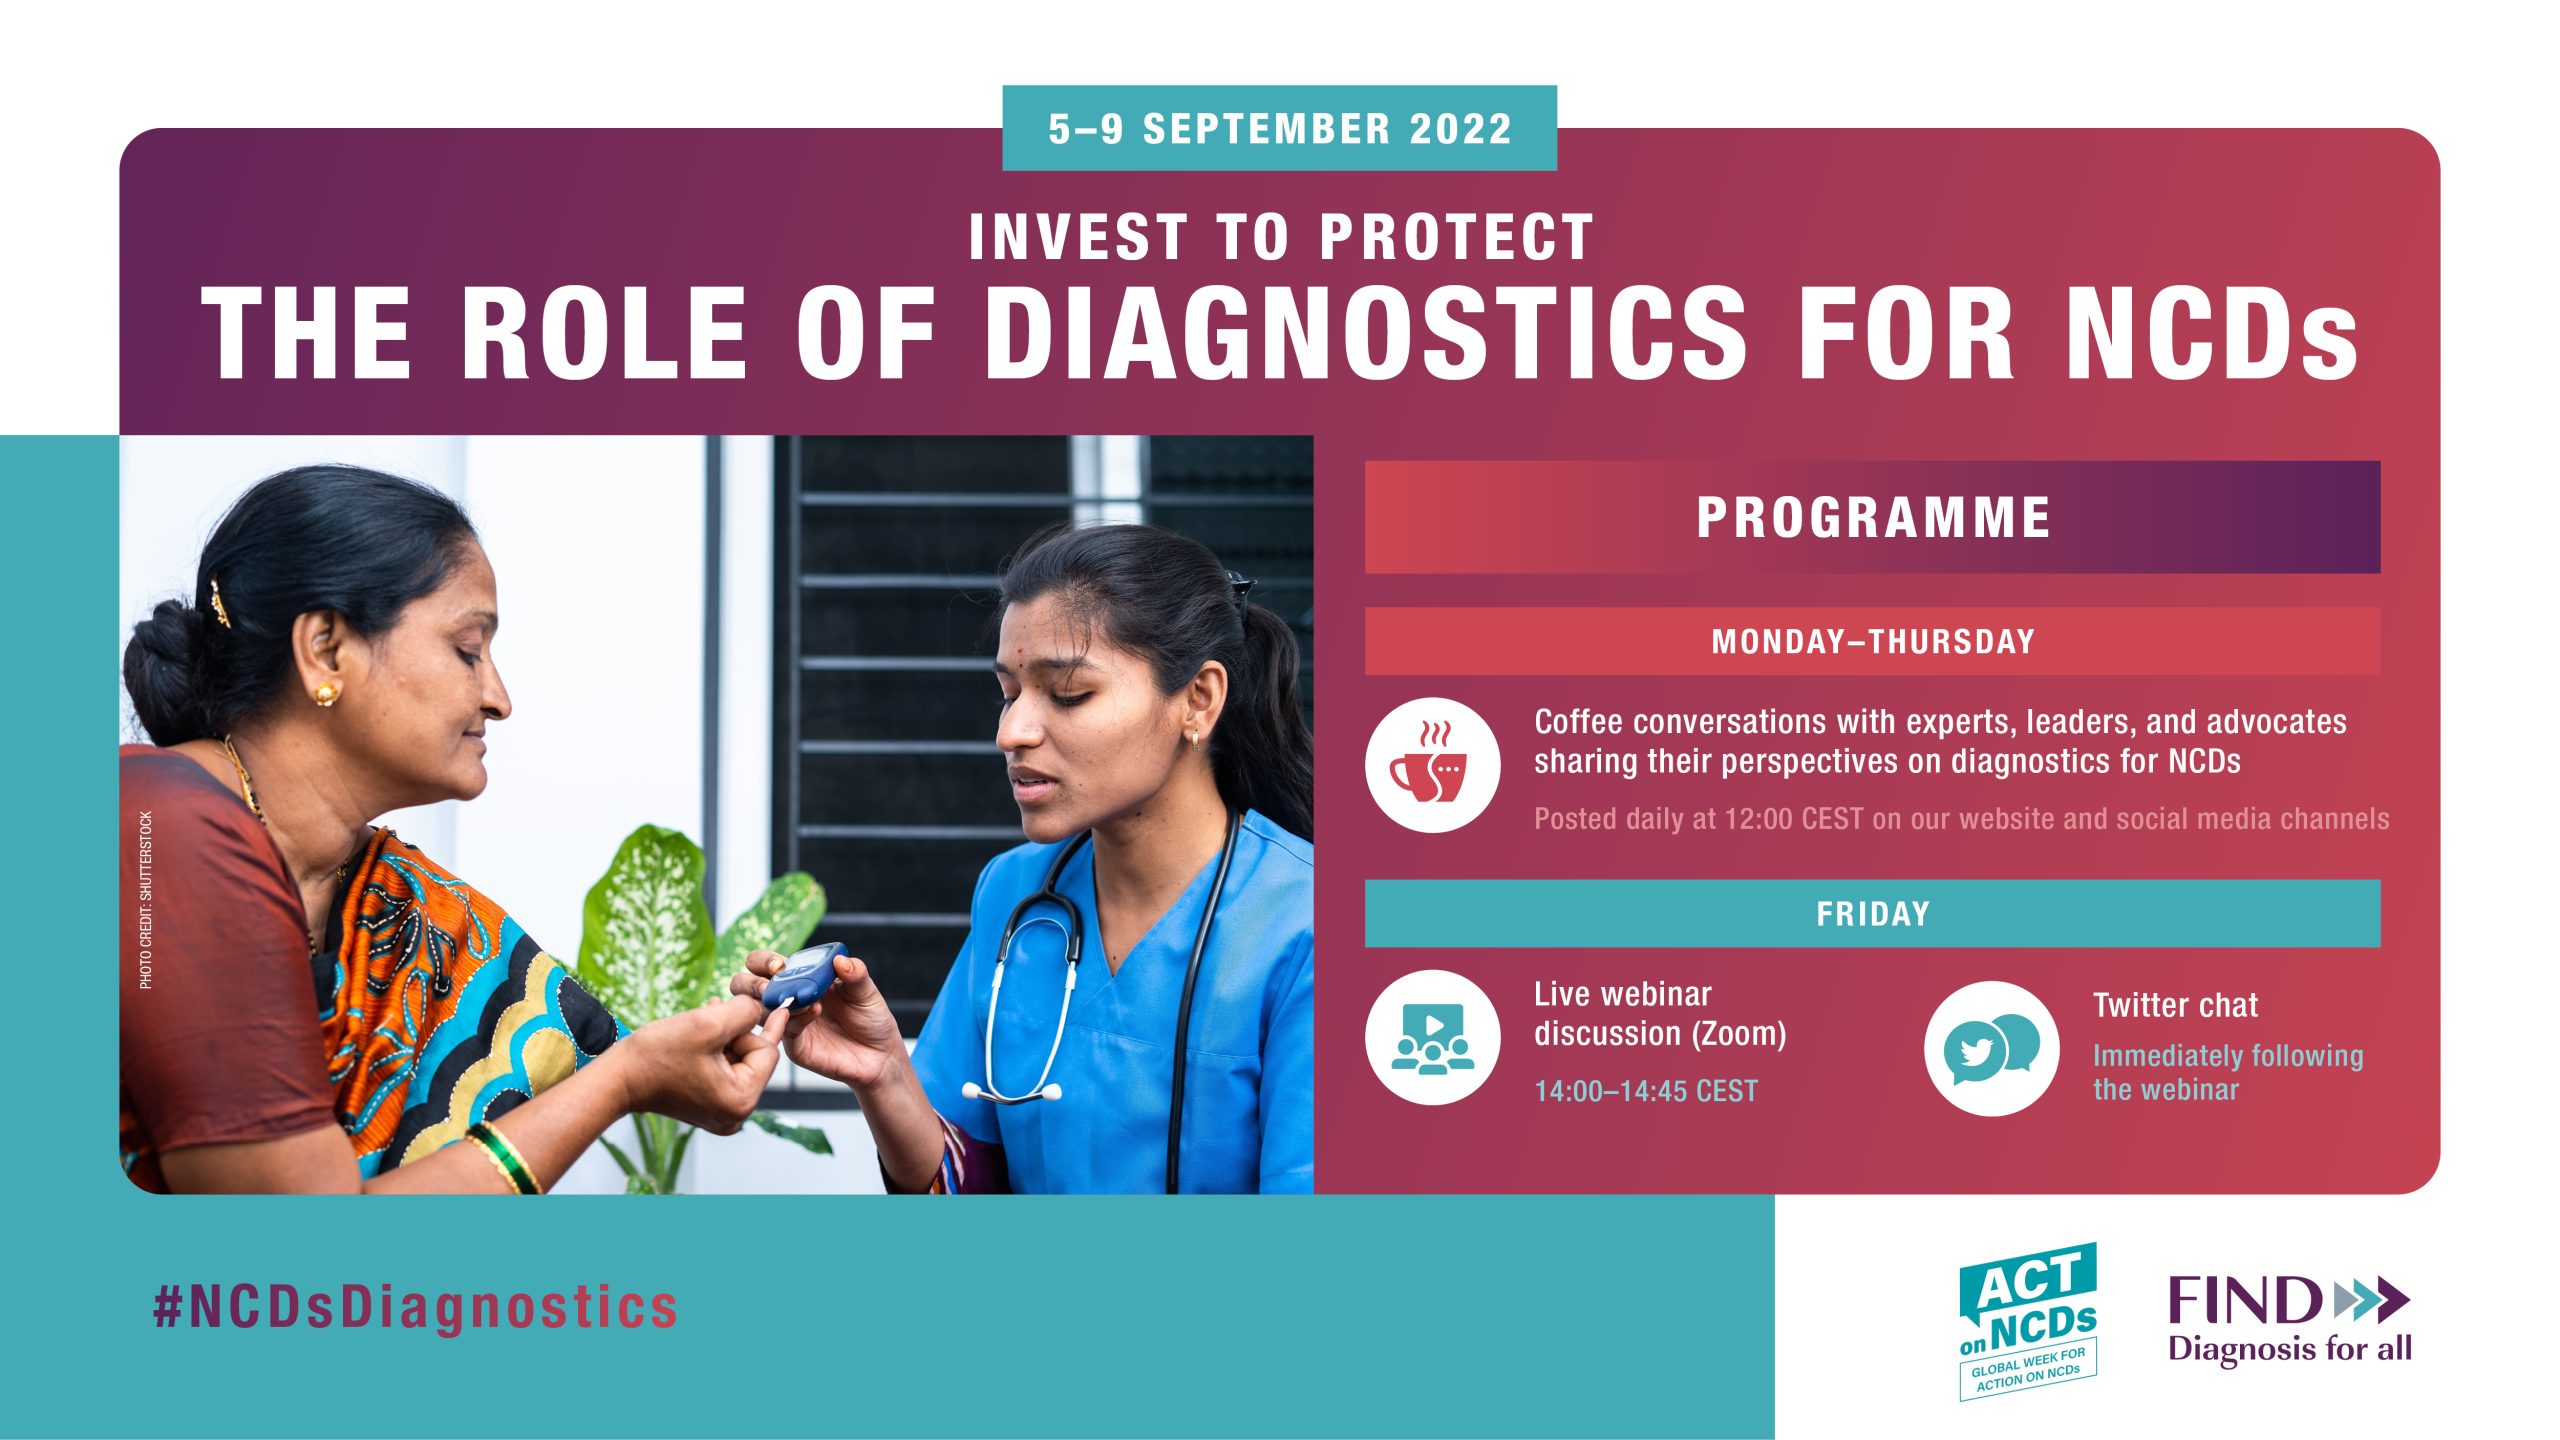 Invest to protect: the role of diagnostics for NCDs